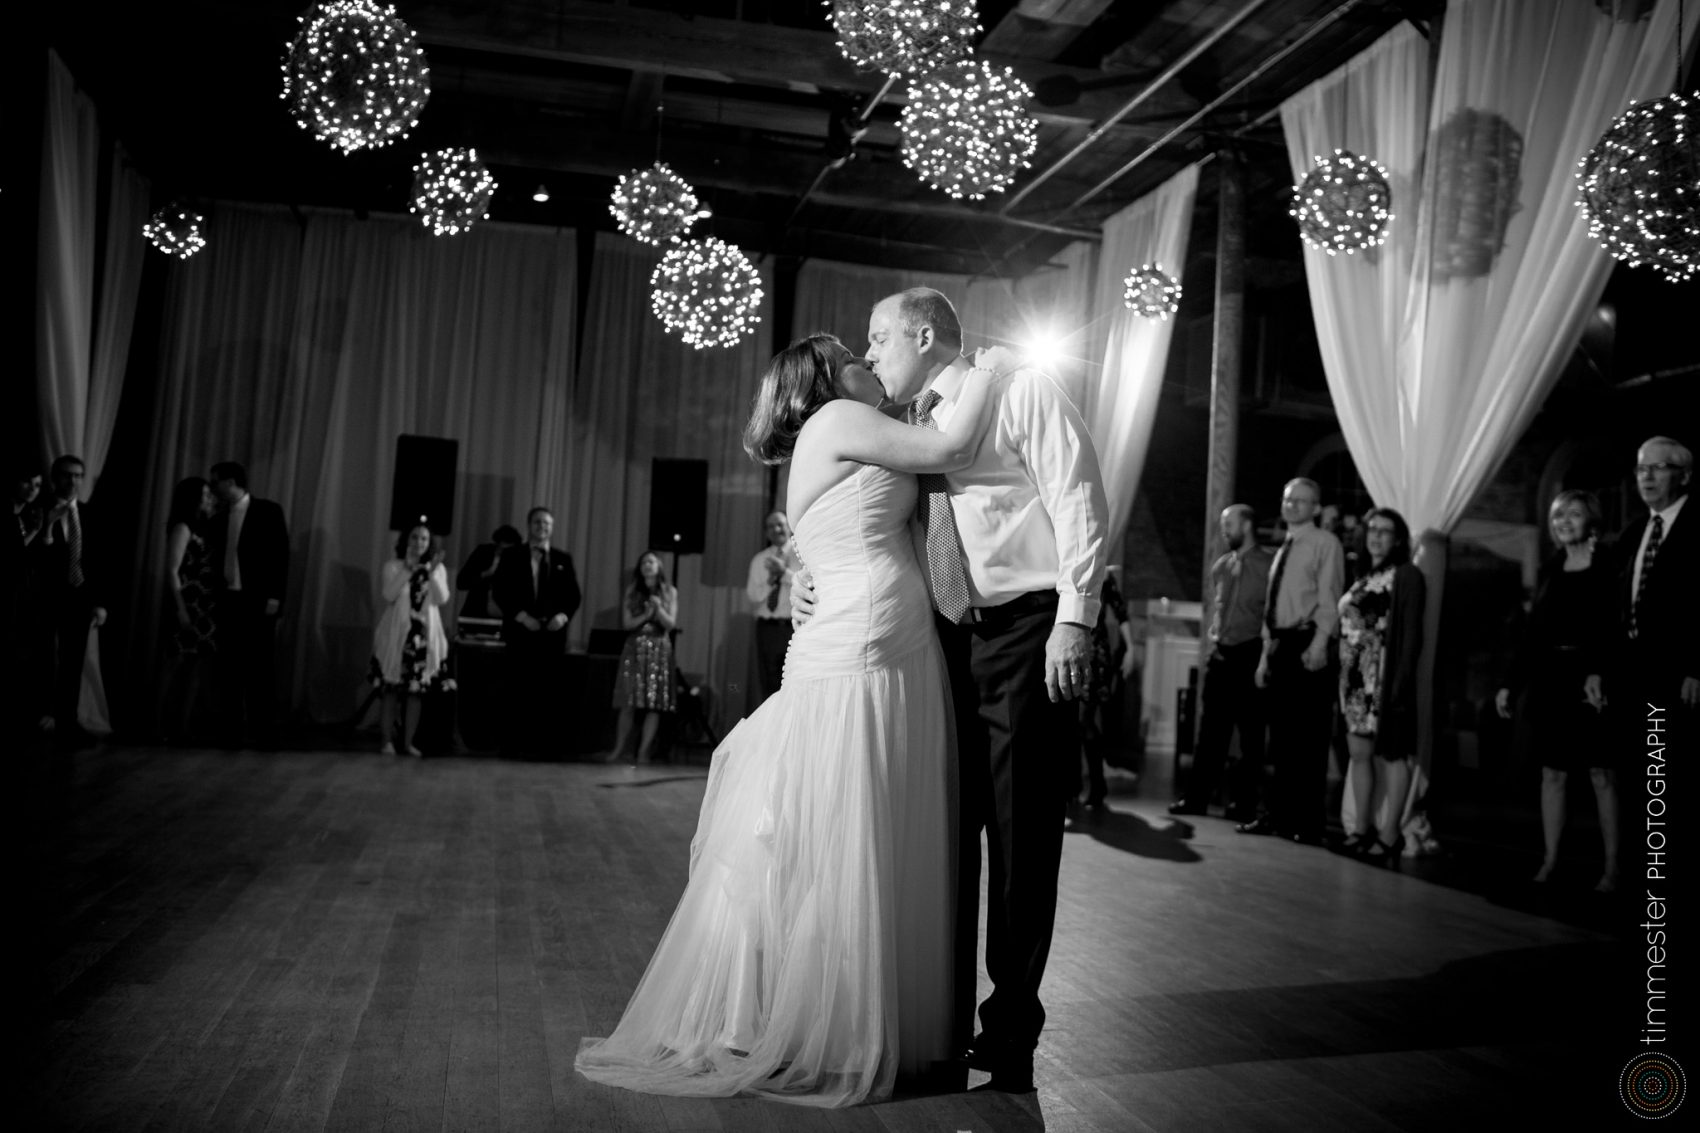 Jessica + David got married at The Cotton Room in Durham, NC.